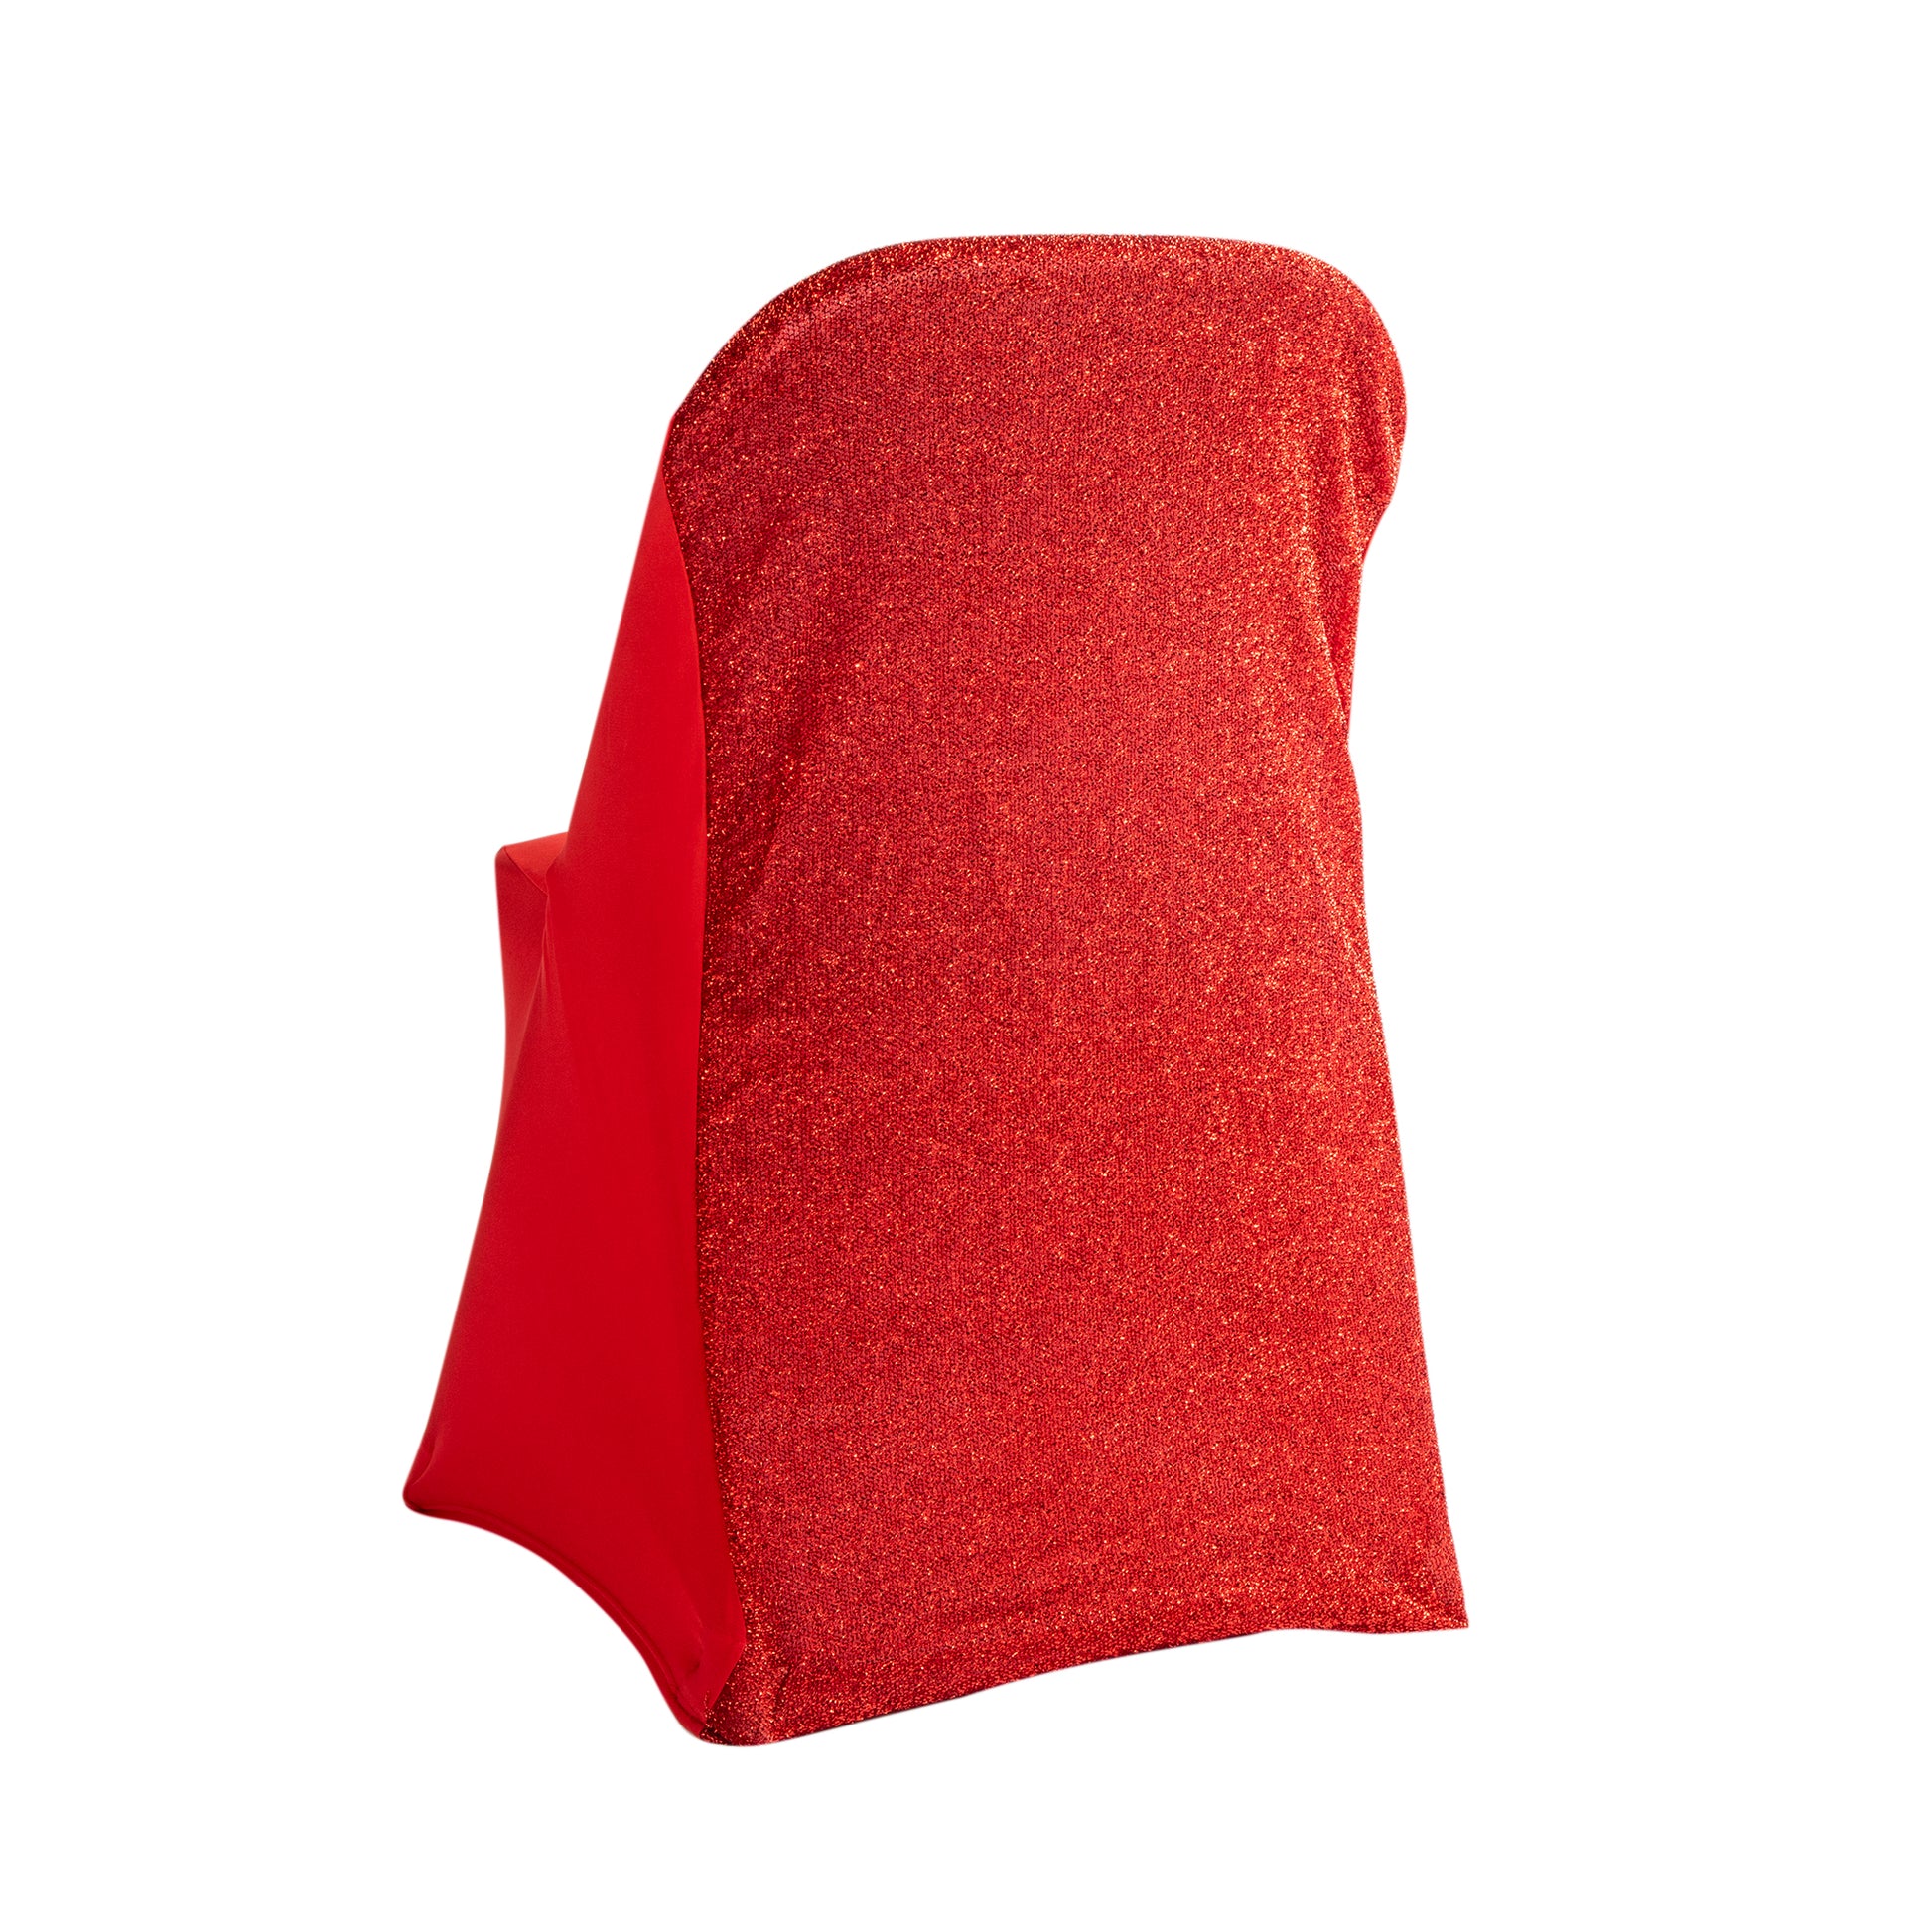 Shimmer Tinsel Folding Spandex Chair Cover - Red